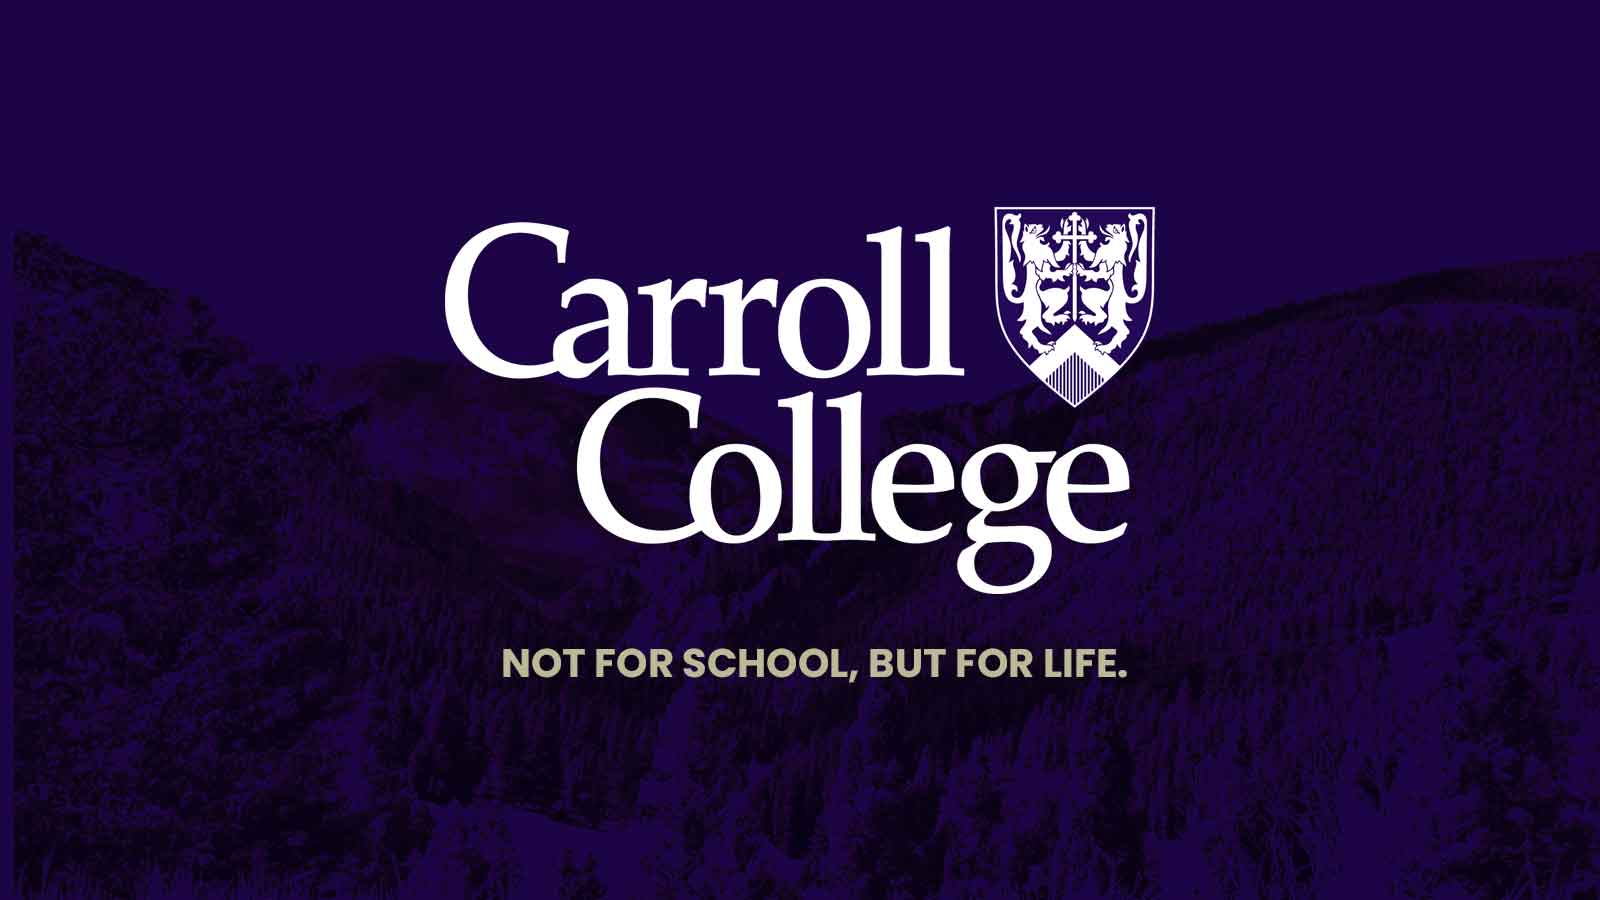 Sodexo Gives $2.5 Million to Carroll College